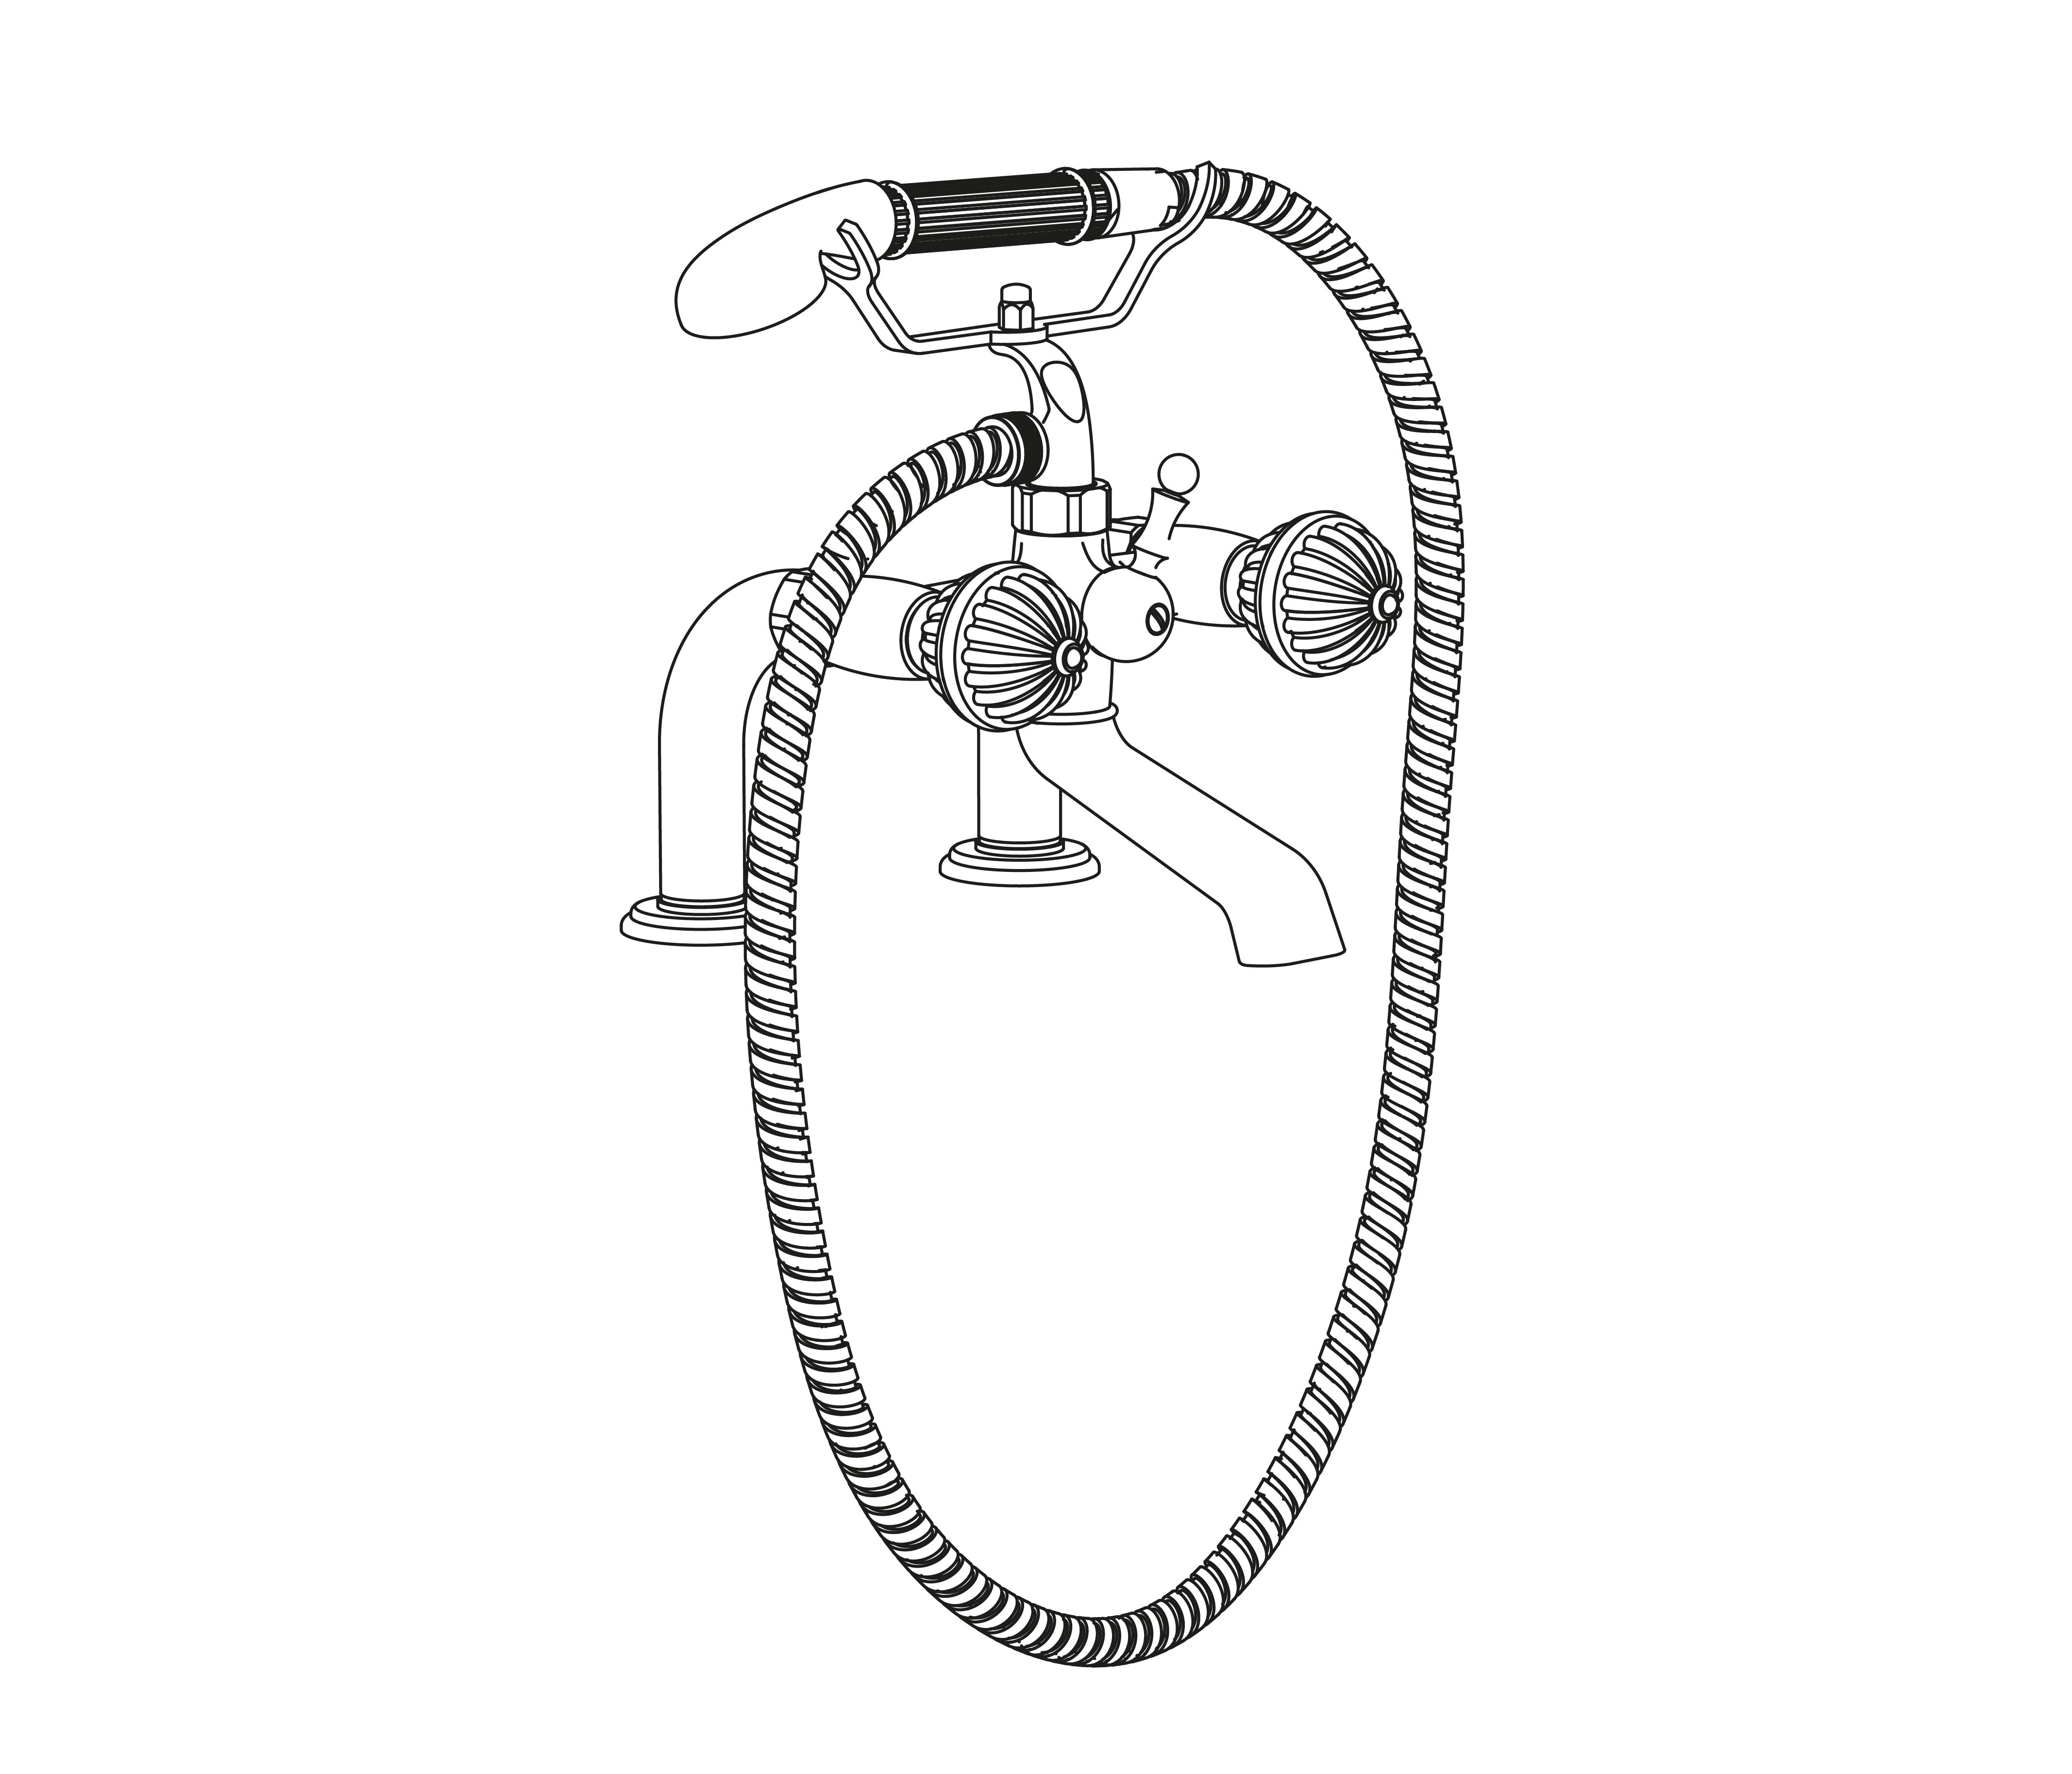 S126-3306 Rim mounted bath and shower mixer